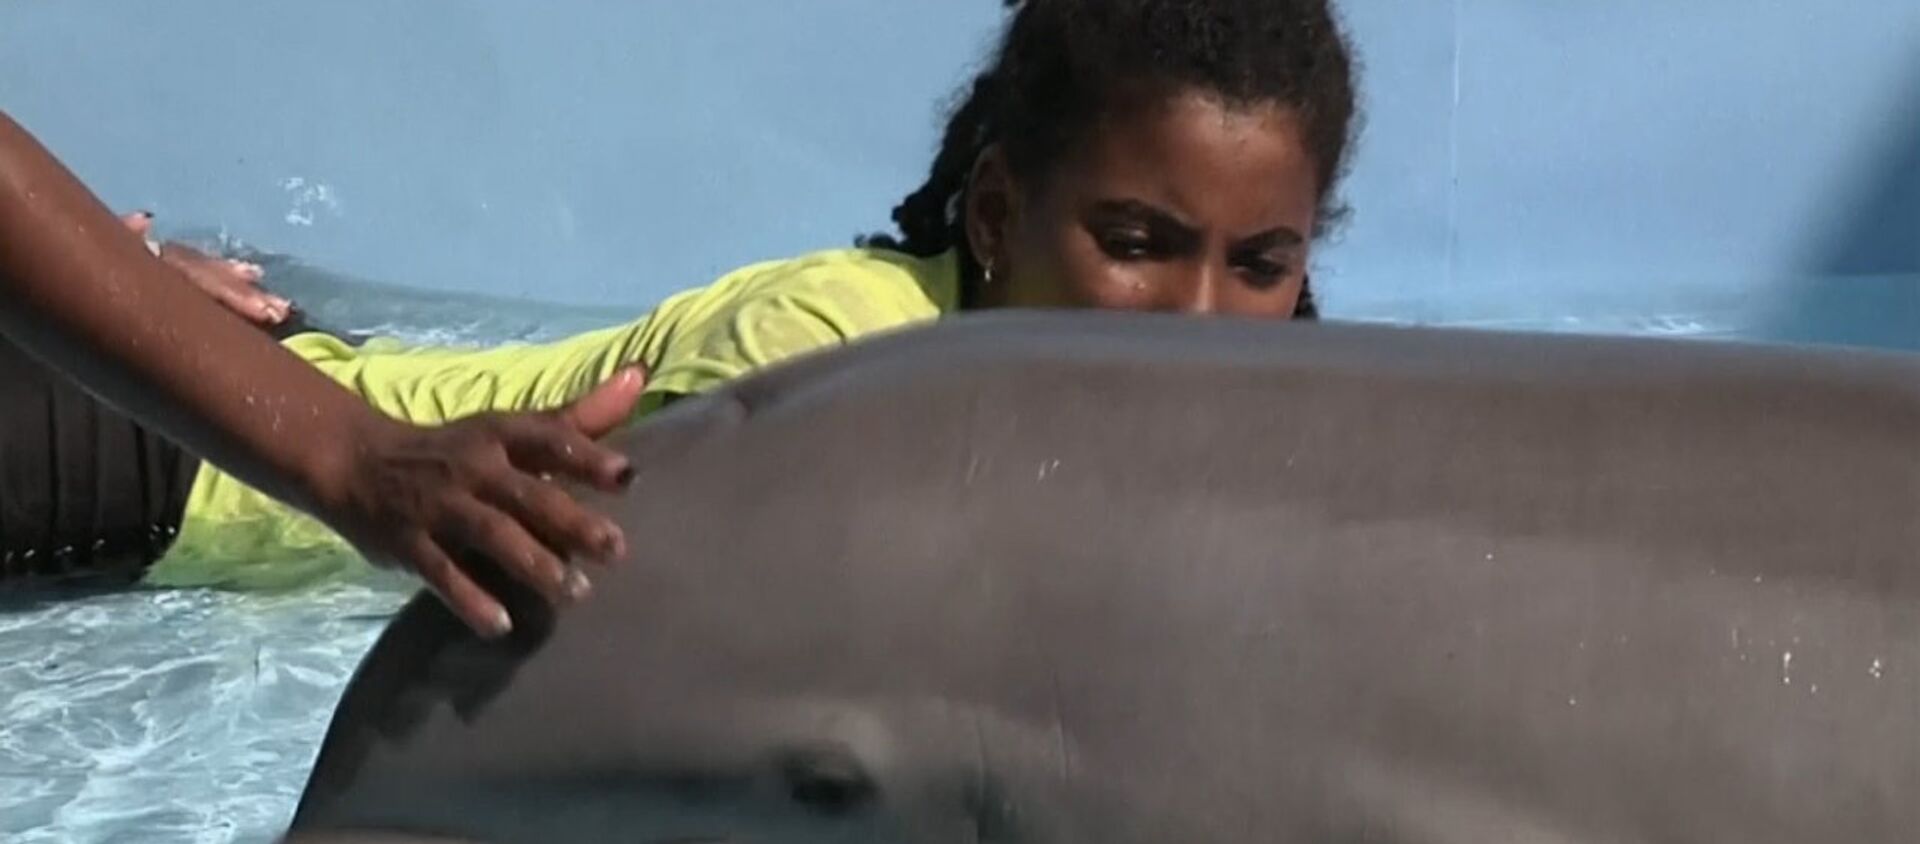 Therapy in an Aquarium: Dolphins Teach Kids With Special Needs How to Communicate - Sputnik International, 1920, 29.03.2021